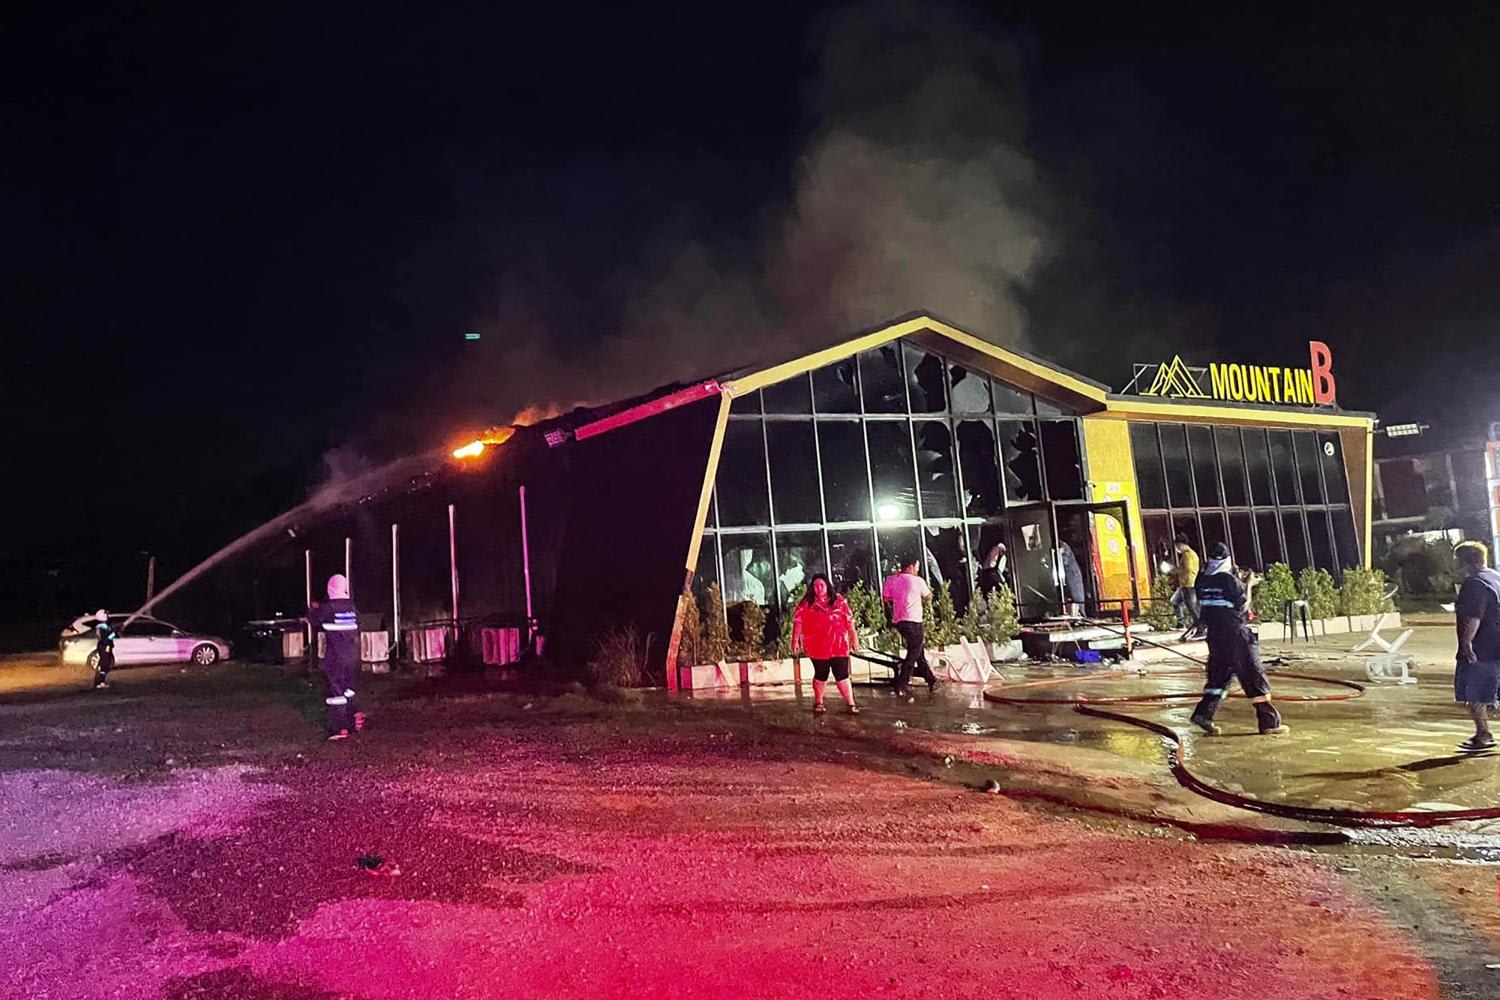 A handout photo taken and released on Aug 5, 2022 by the Sawang Rojanathammasathan Rescue Foundation shows firefighters working to contain a fire at the Mountain B nightclub in Sattahip district in Thailand's Chonburi province. 